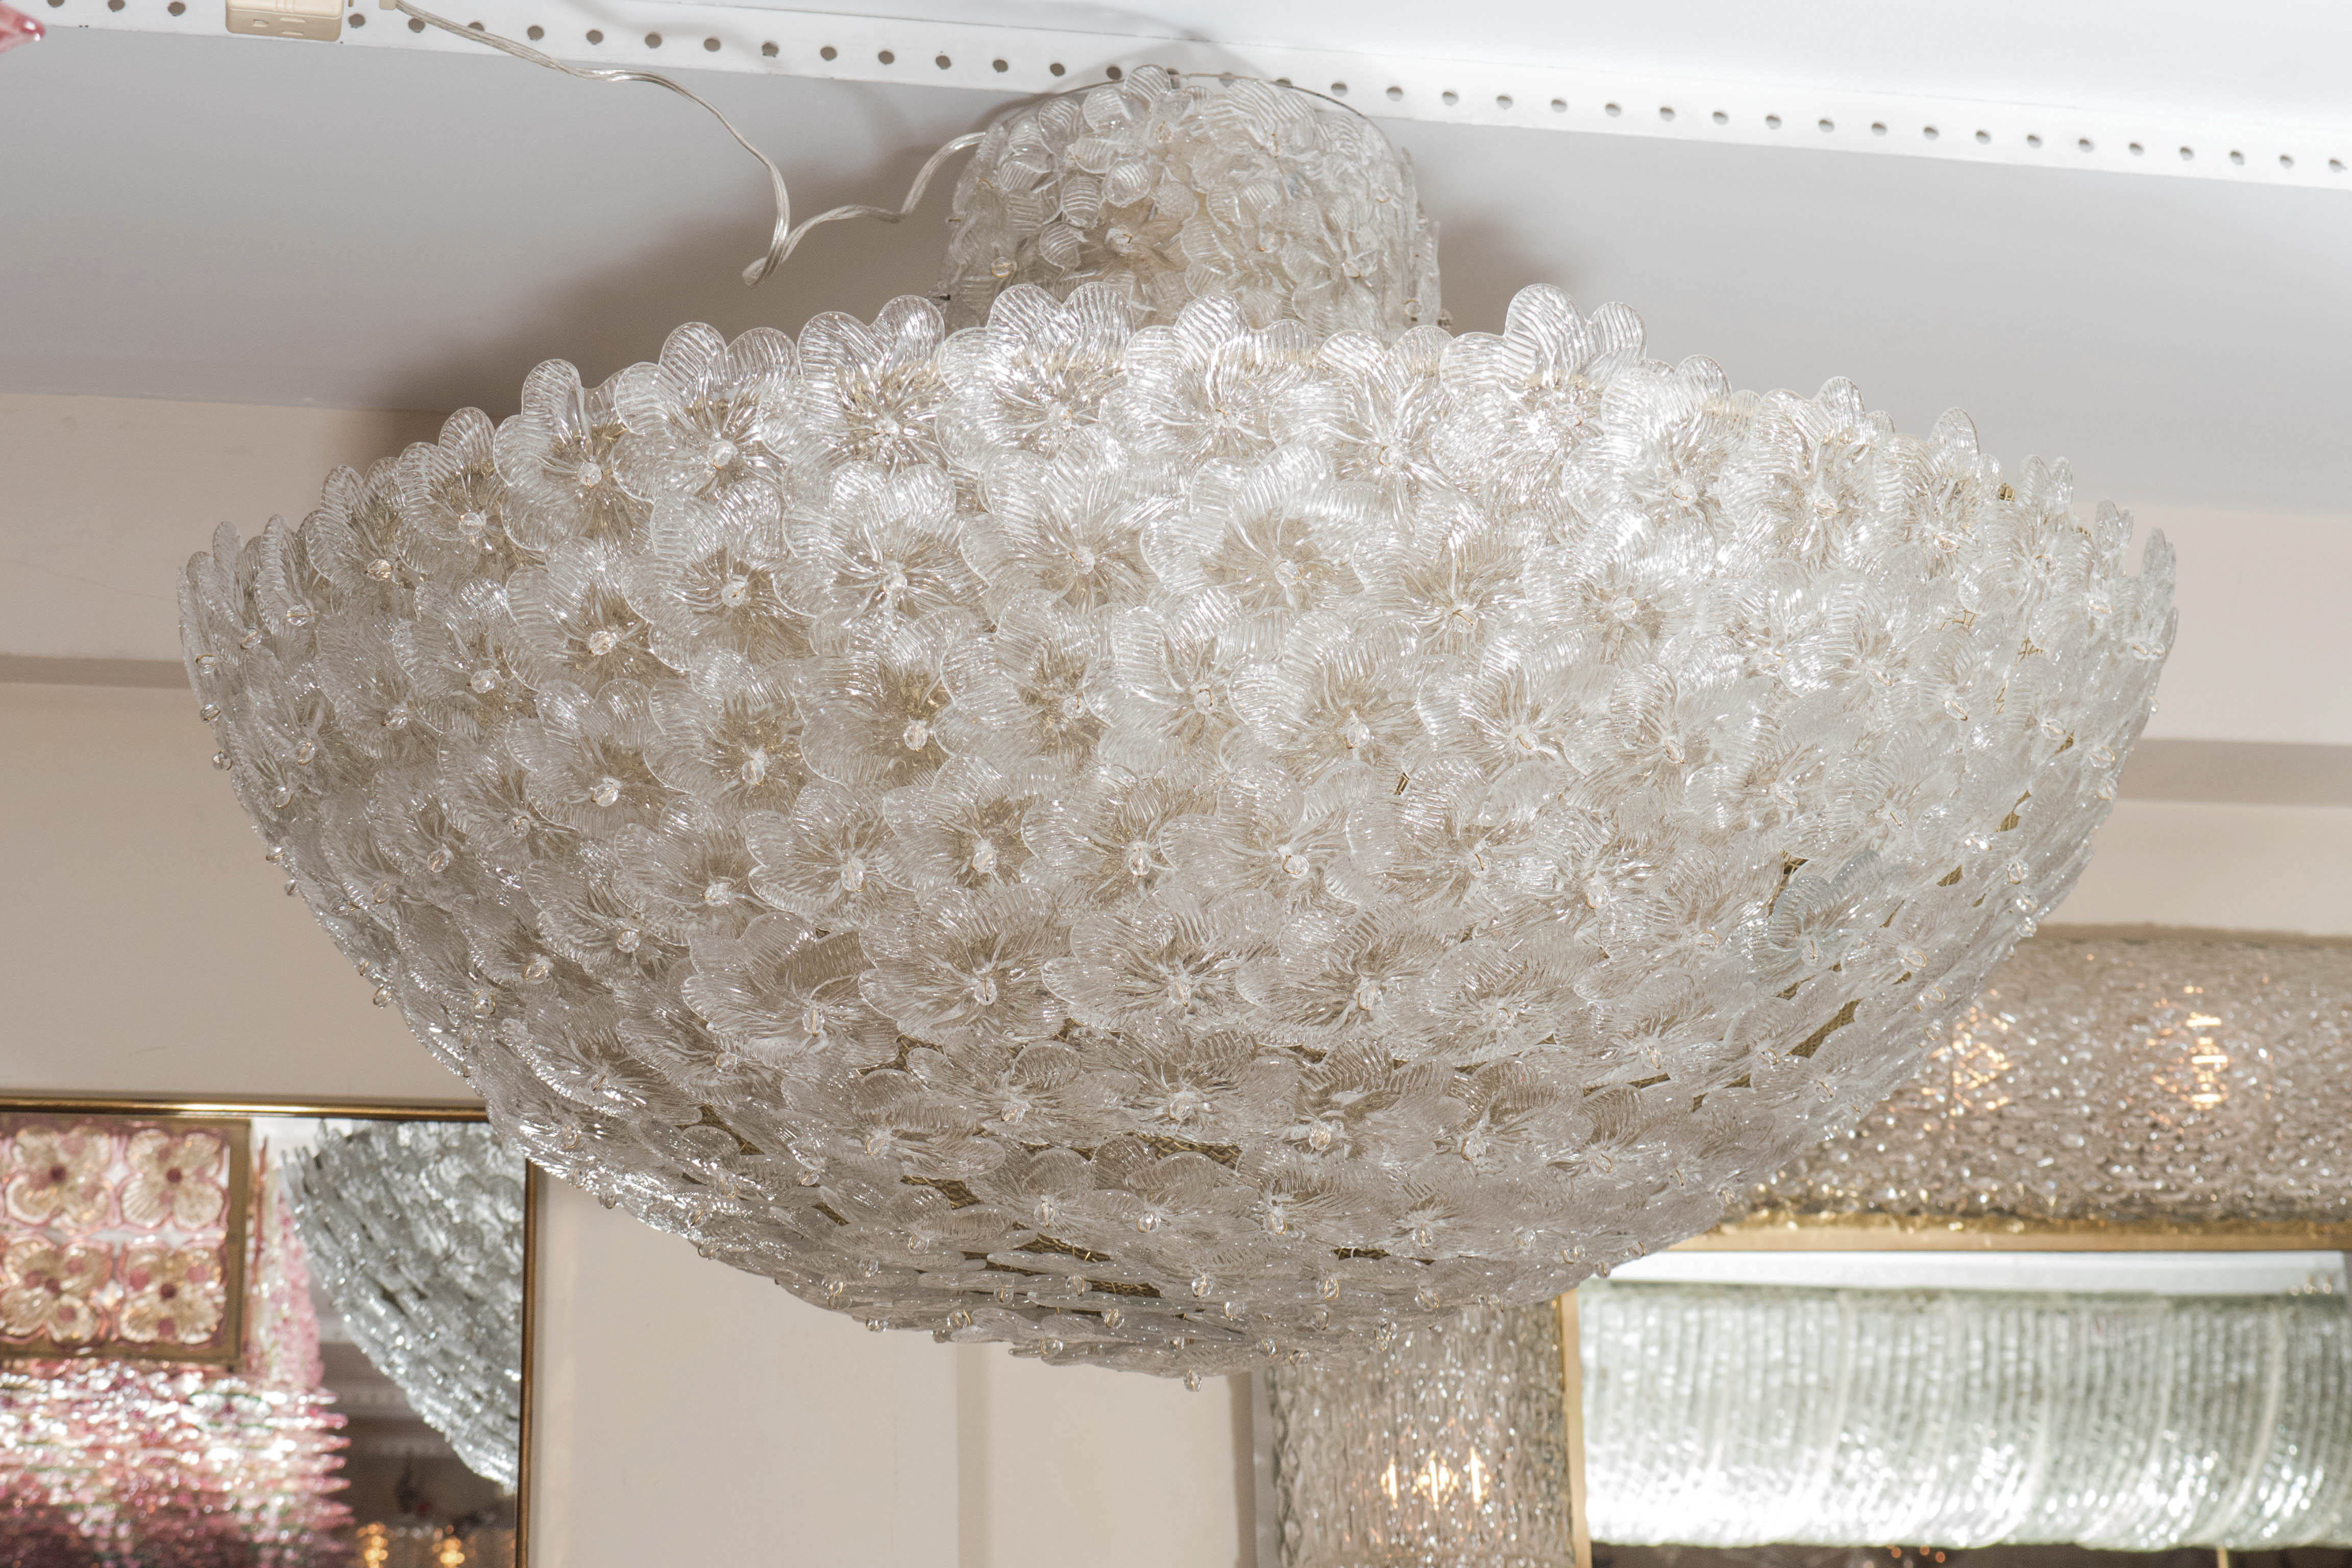 Dome Form Ceiling Fixture Composed of Clear and Frosted Glass Flowers